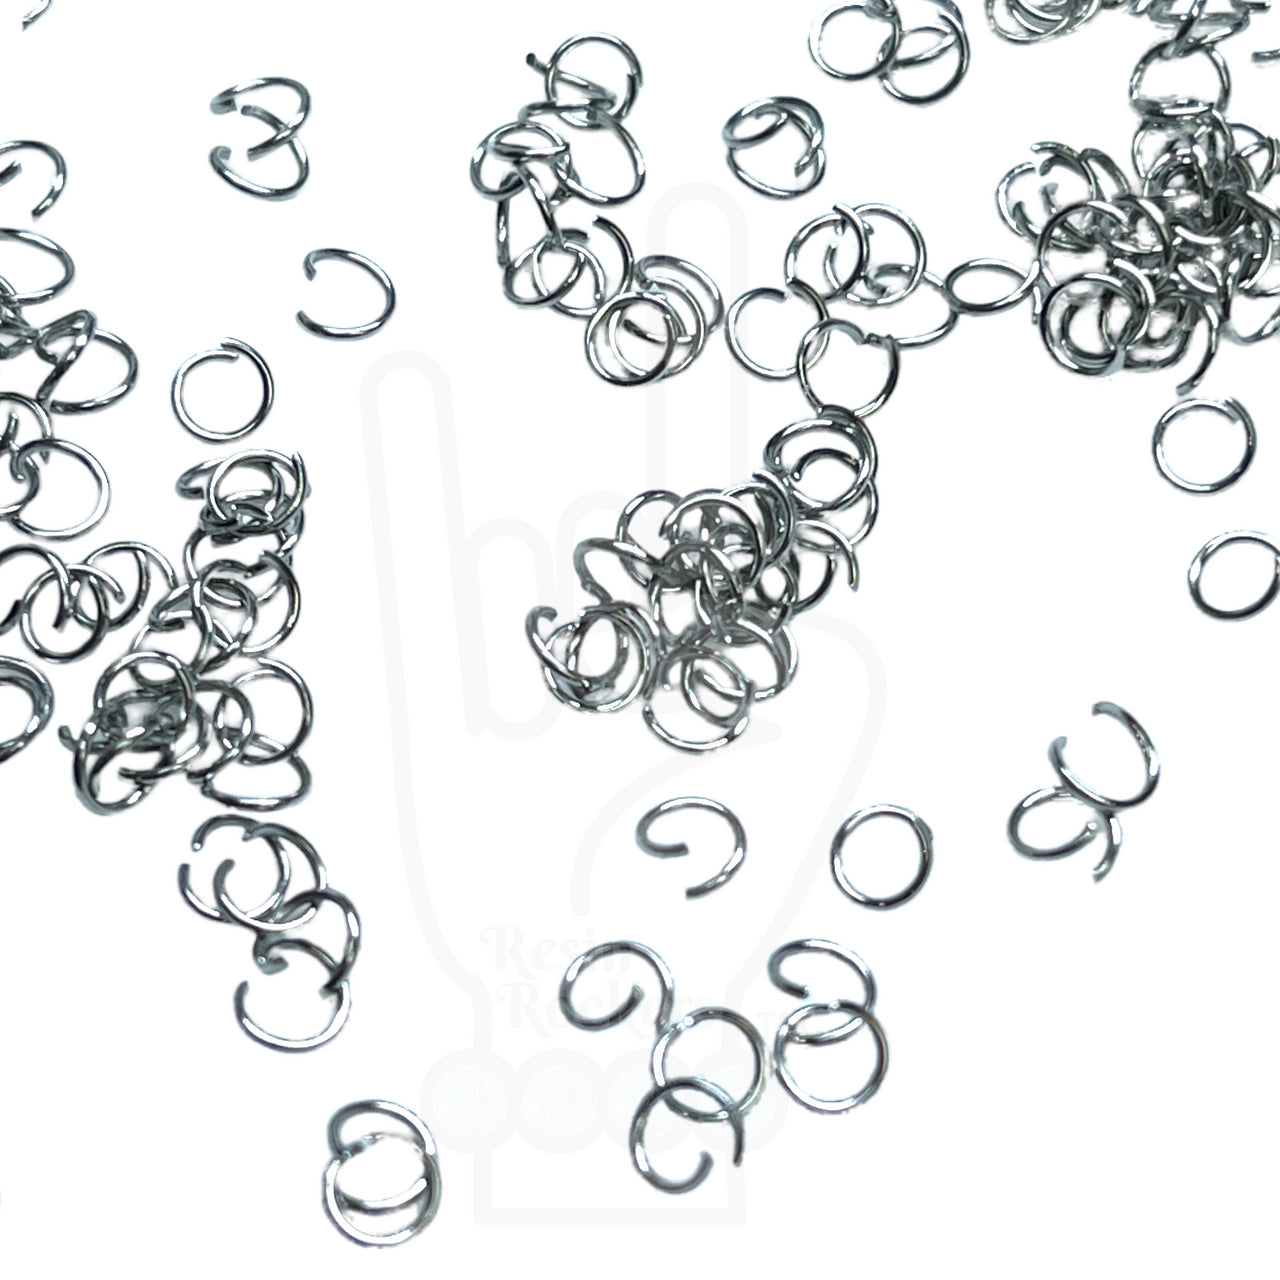 Mini Open Stainless Steel Jump Ring Shapes for Pen Charms (approx. 100)